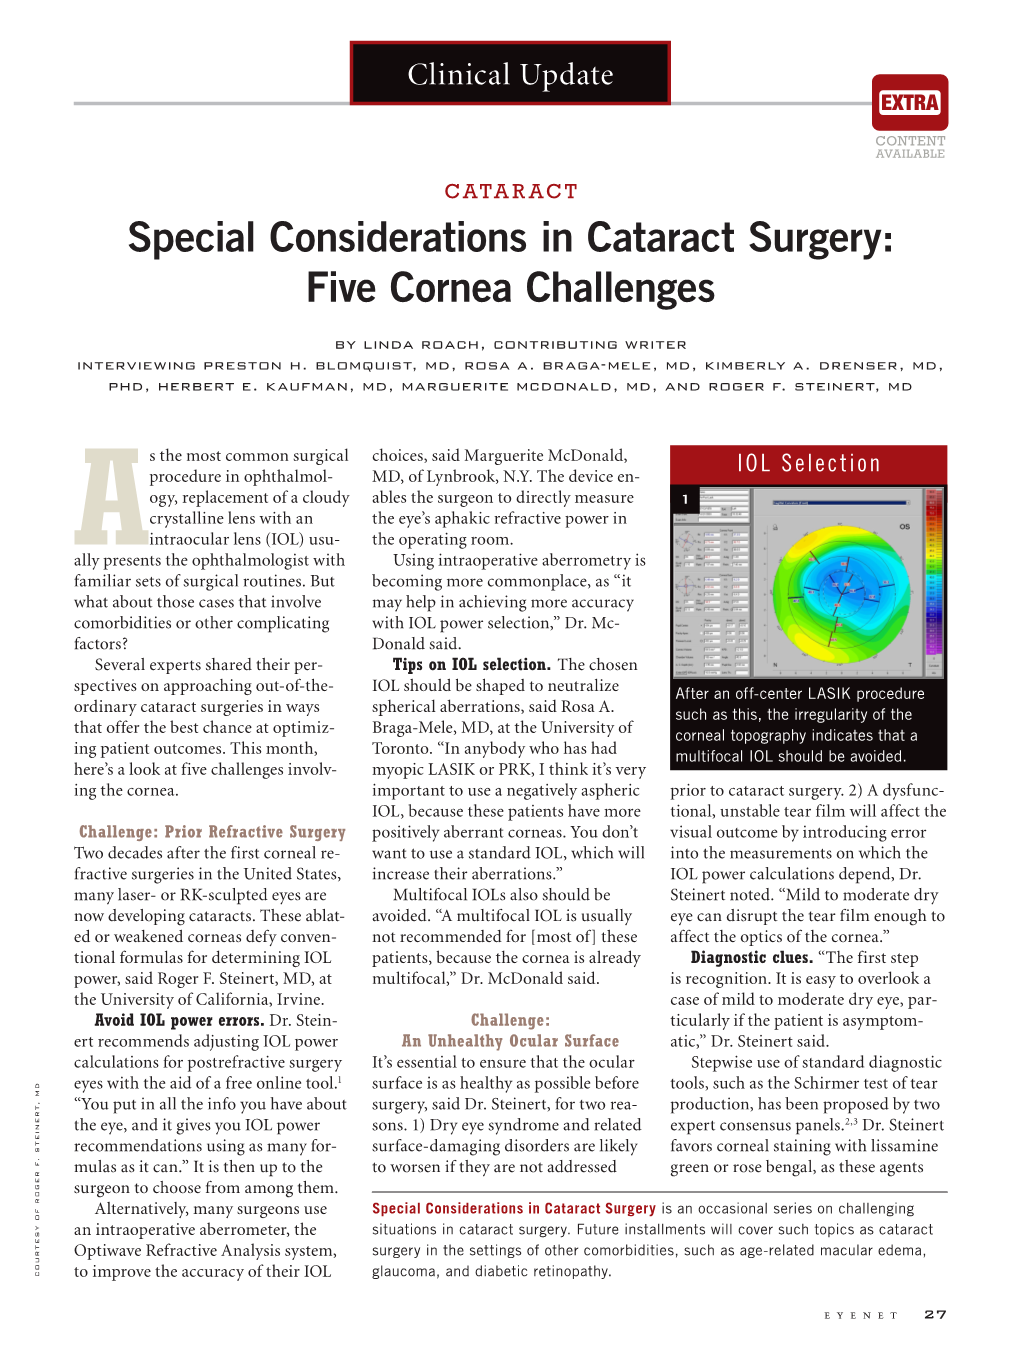 Special Considerations in Cataract Surgery: Five Cornea Challenges